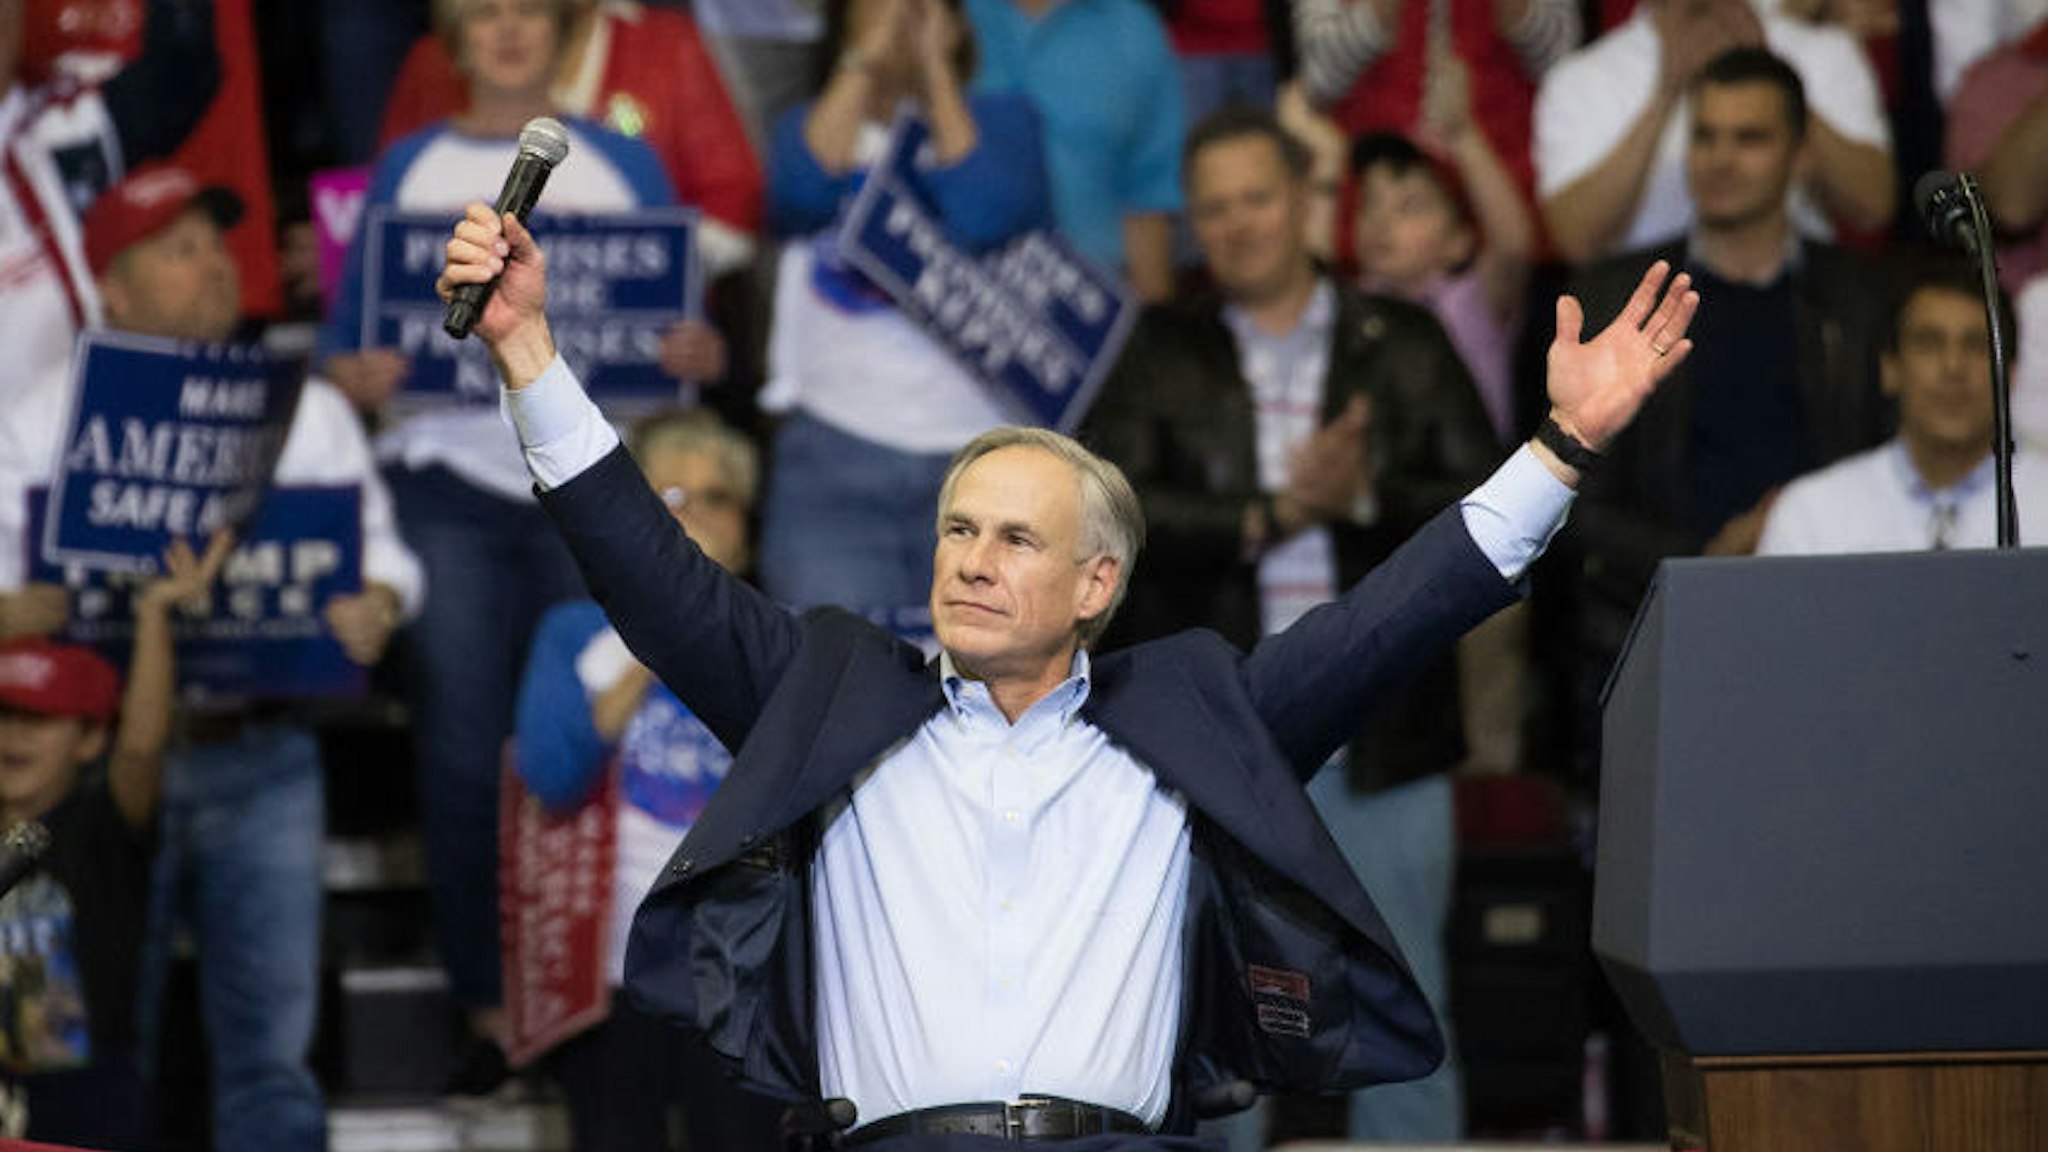 Governor Greg Abbott of Texas addresses the crowd before President Donald Trump took the stage for a rally in support of Sen. Ted Cruz (R-TX) on October 22, 2018 at the Toyota Center in Houston, Texas.